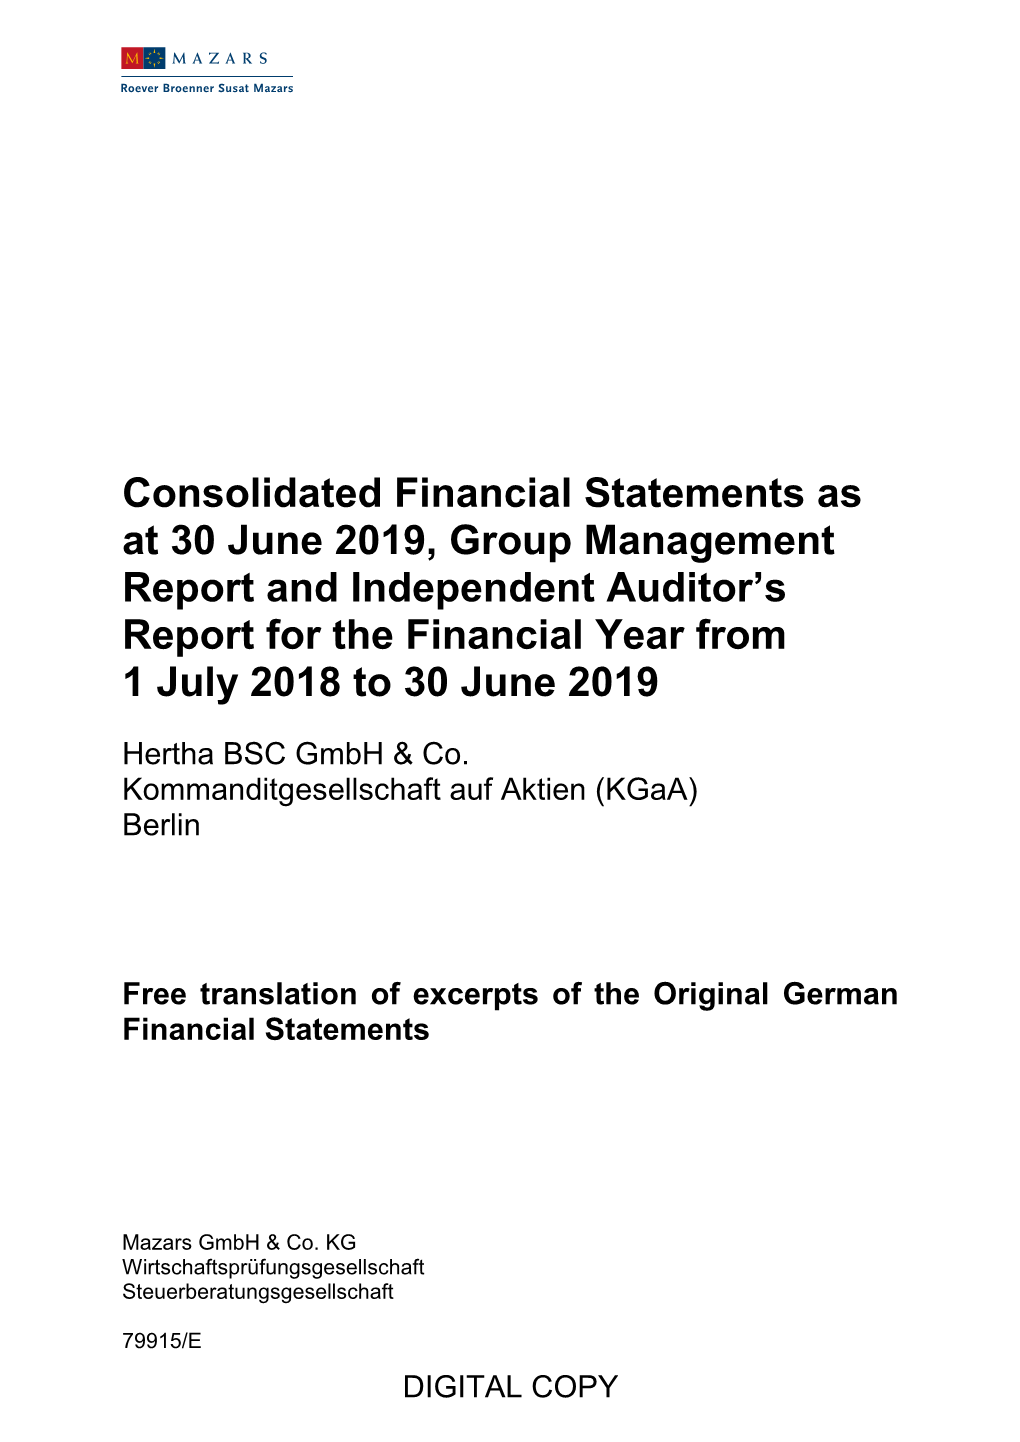 Consolidated Financial Statements As at 30 June 2019, Group